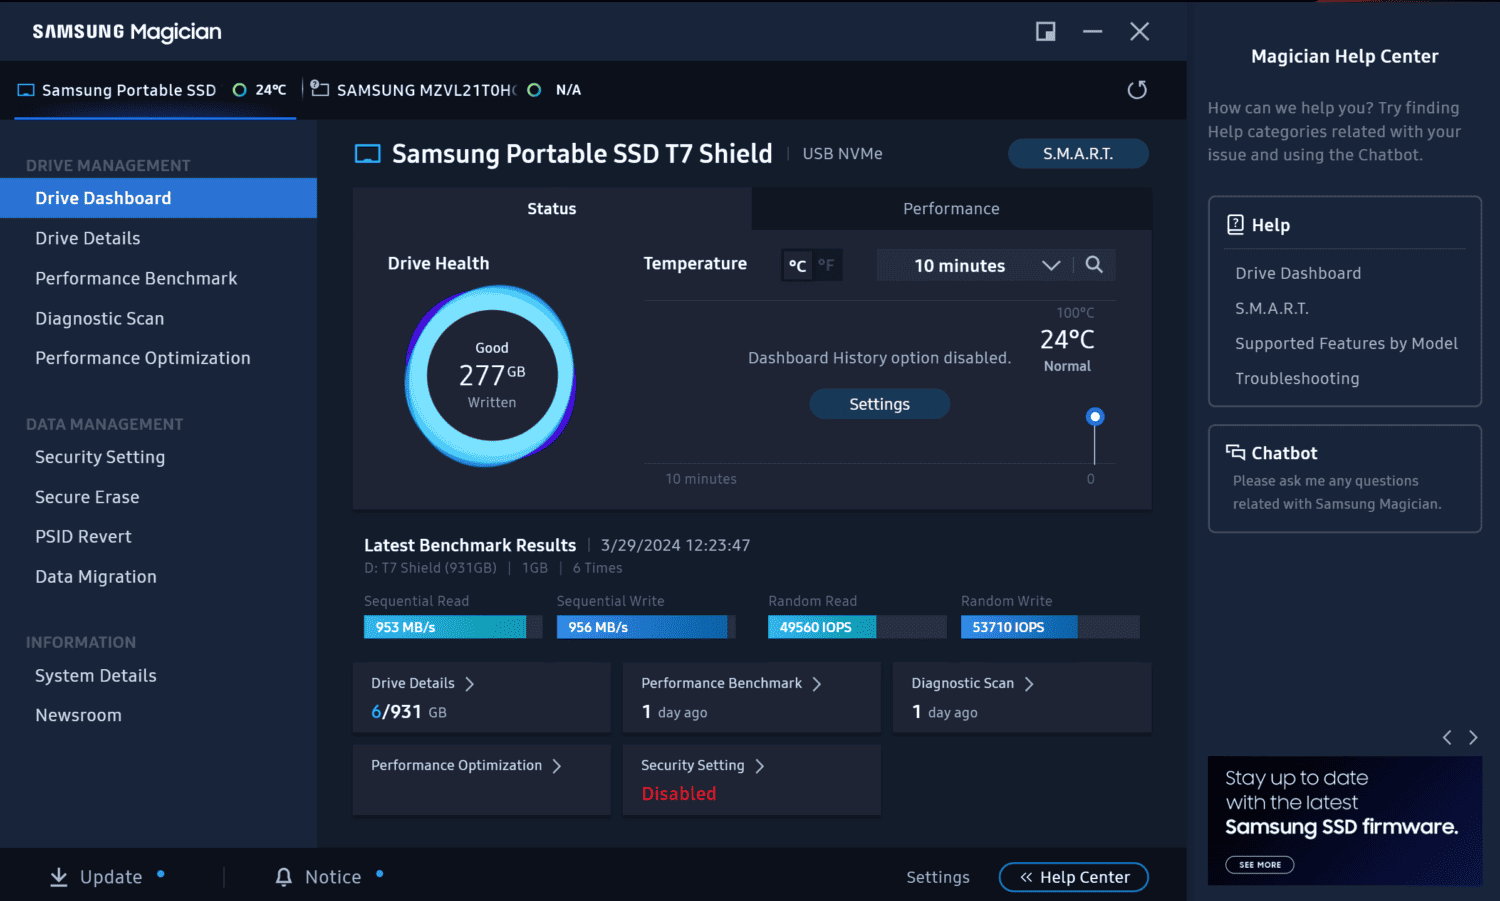 A screenshot of Samsung Magician showing the drive status and temperature of the Samsung T7 Shield SSD, as well as various management and performance optimization options.